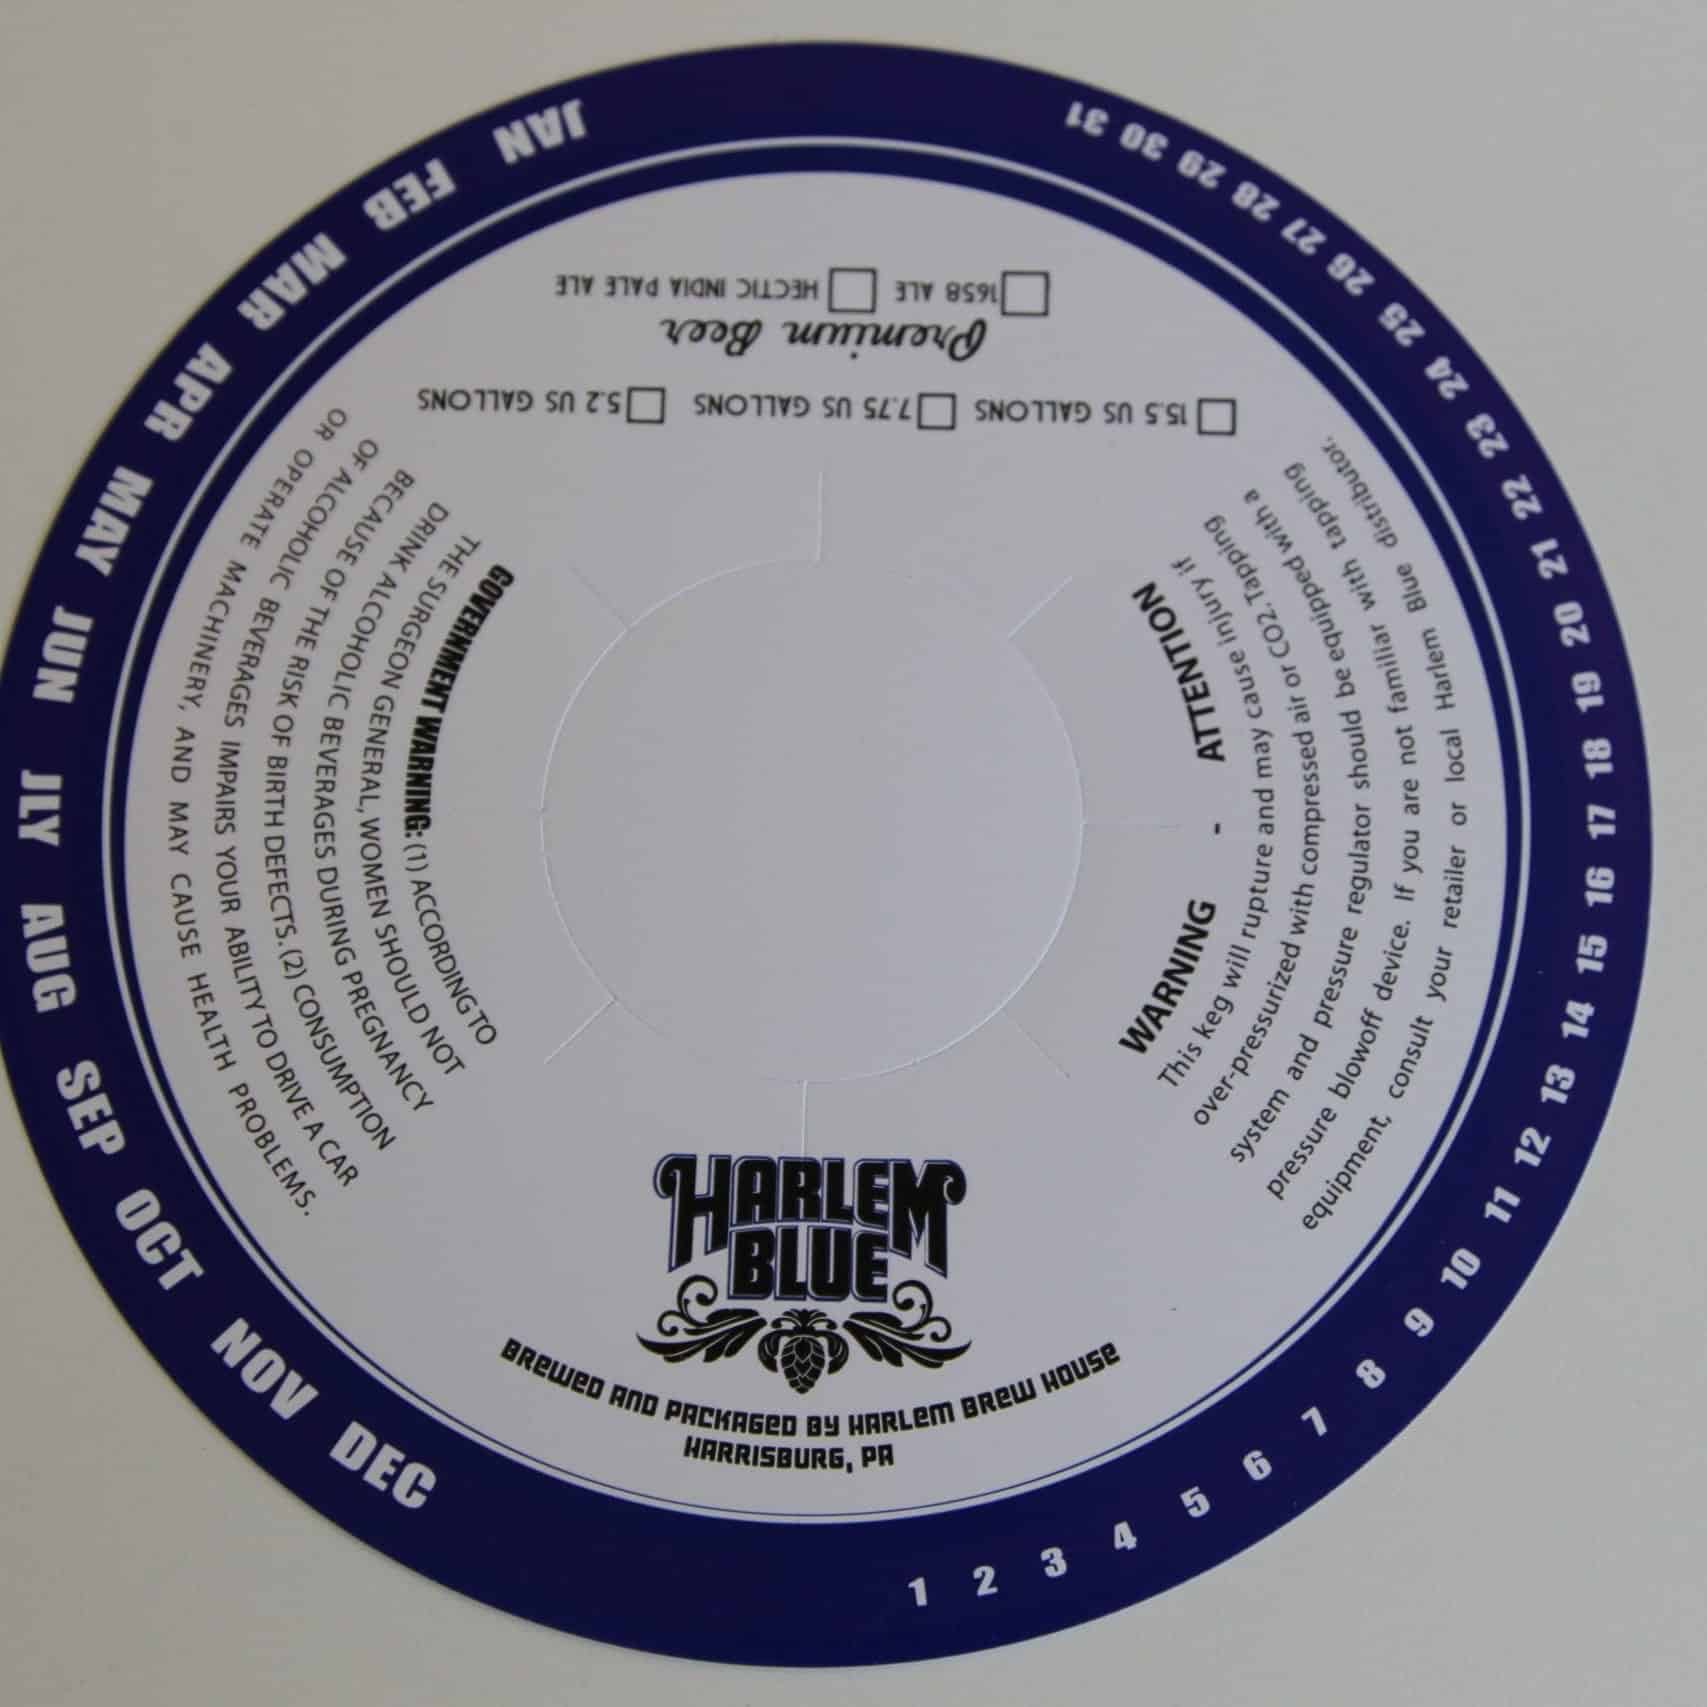 Columbine Label Inc. designed and manufactured a keg collar for the Harlem Blue Brewing Company.